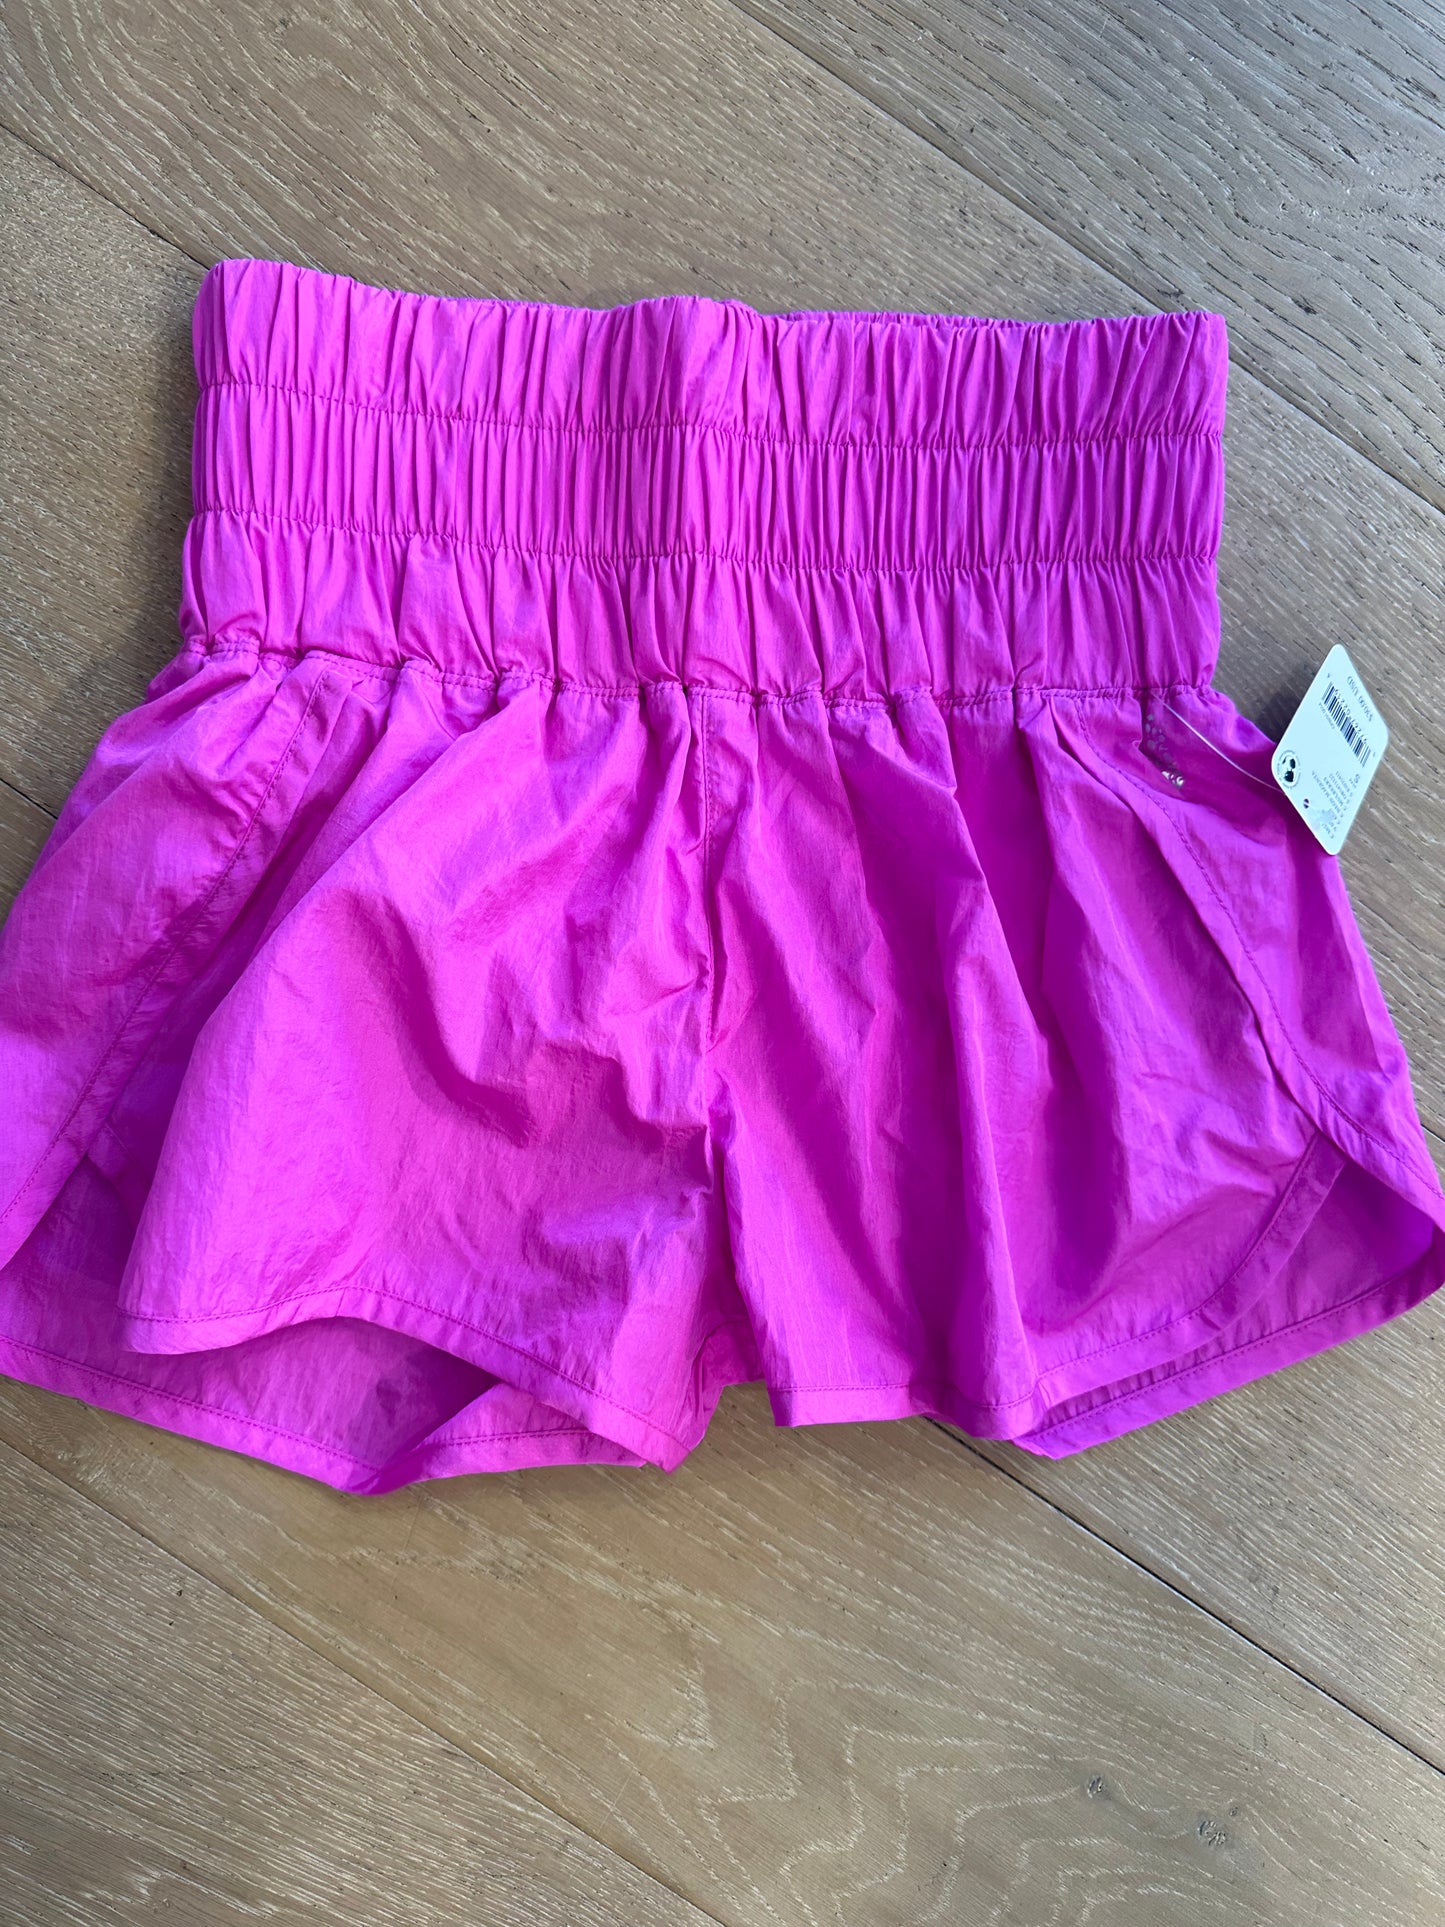 The way home shorts in neon magenta